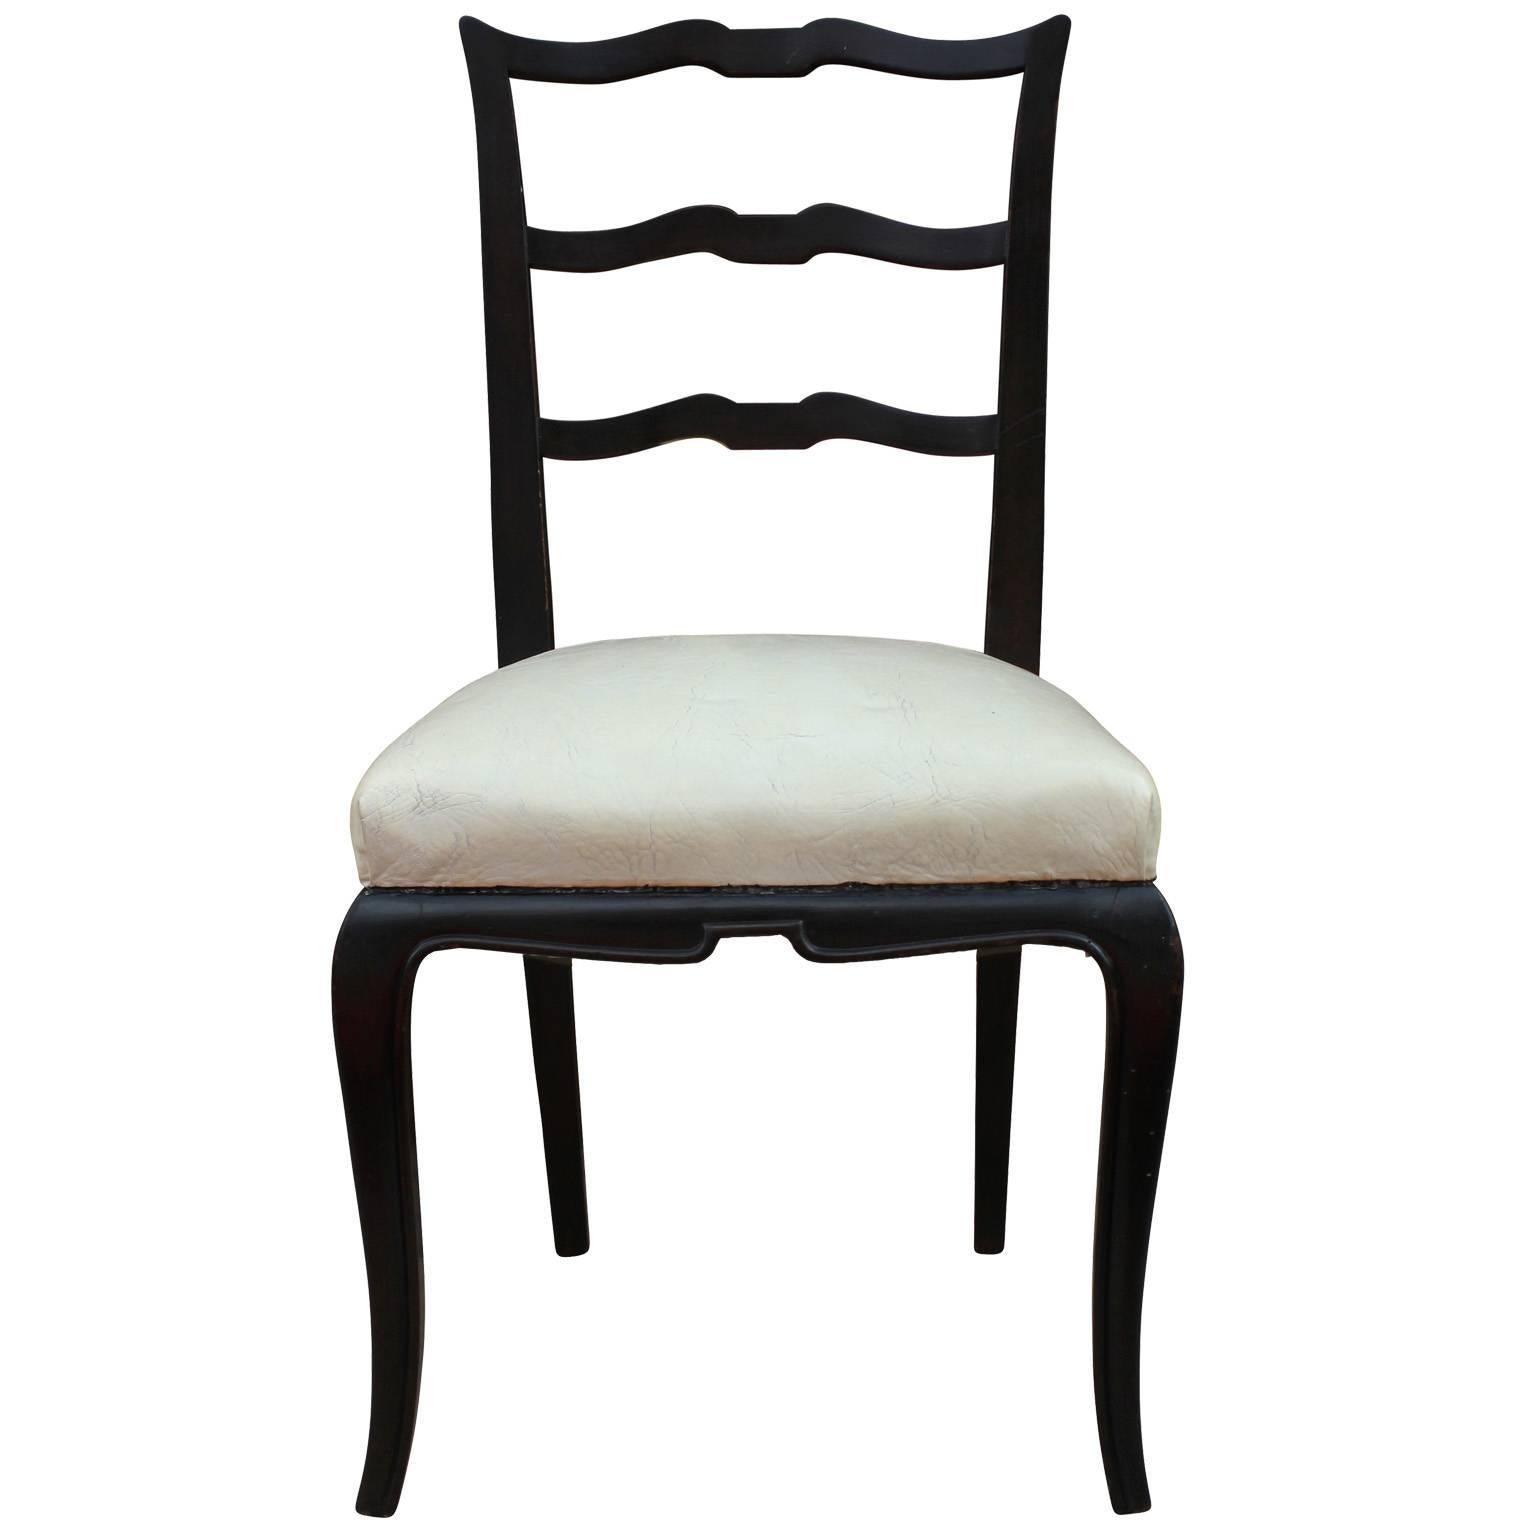 Fabulous set of 8 Argentinian dining chairs. The modern style ladder back chairs are finished in an deep dark brown almost ebony stain. Chairs are upholstered in original cream naugahyde (They need updating). Perfect in a transitional space.